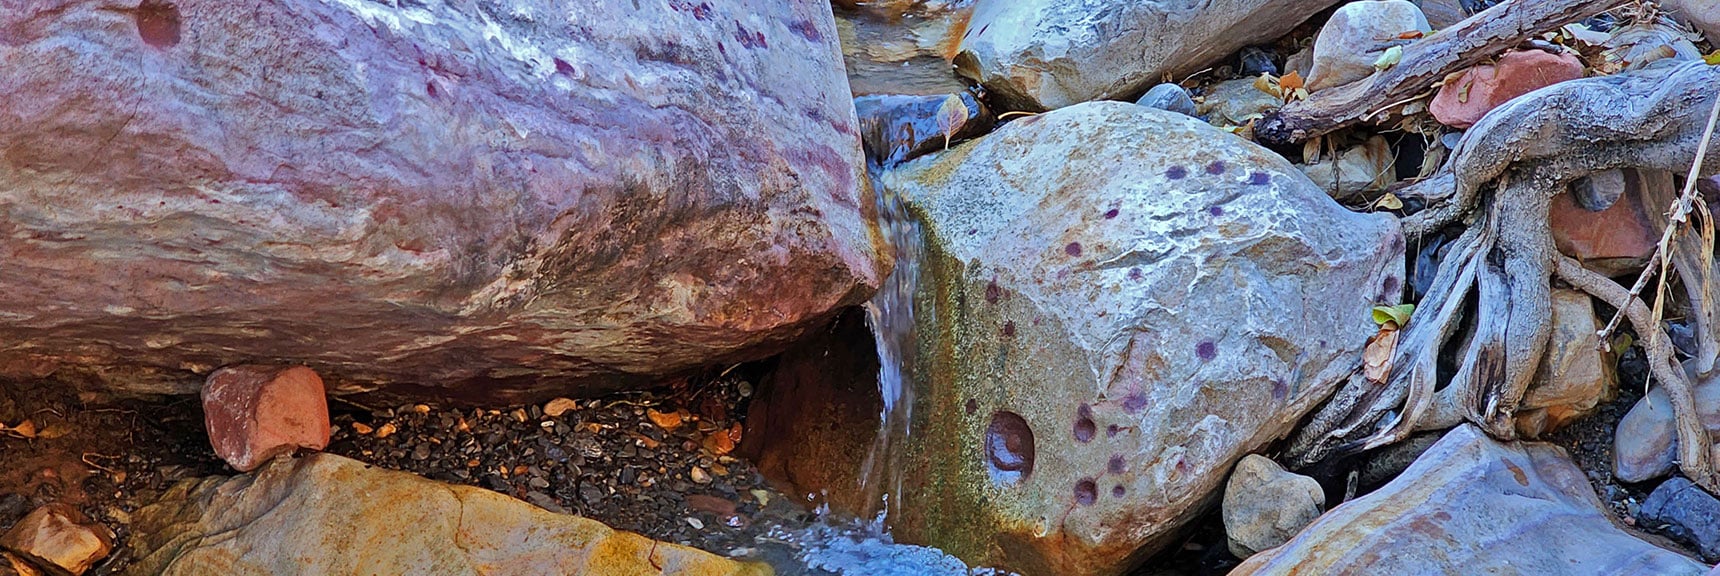 Water Flows Here Year-Round. | Rock Climber Observations | Pine Creek Canyon | Rainbow Mountain Wilderness, Nevada